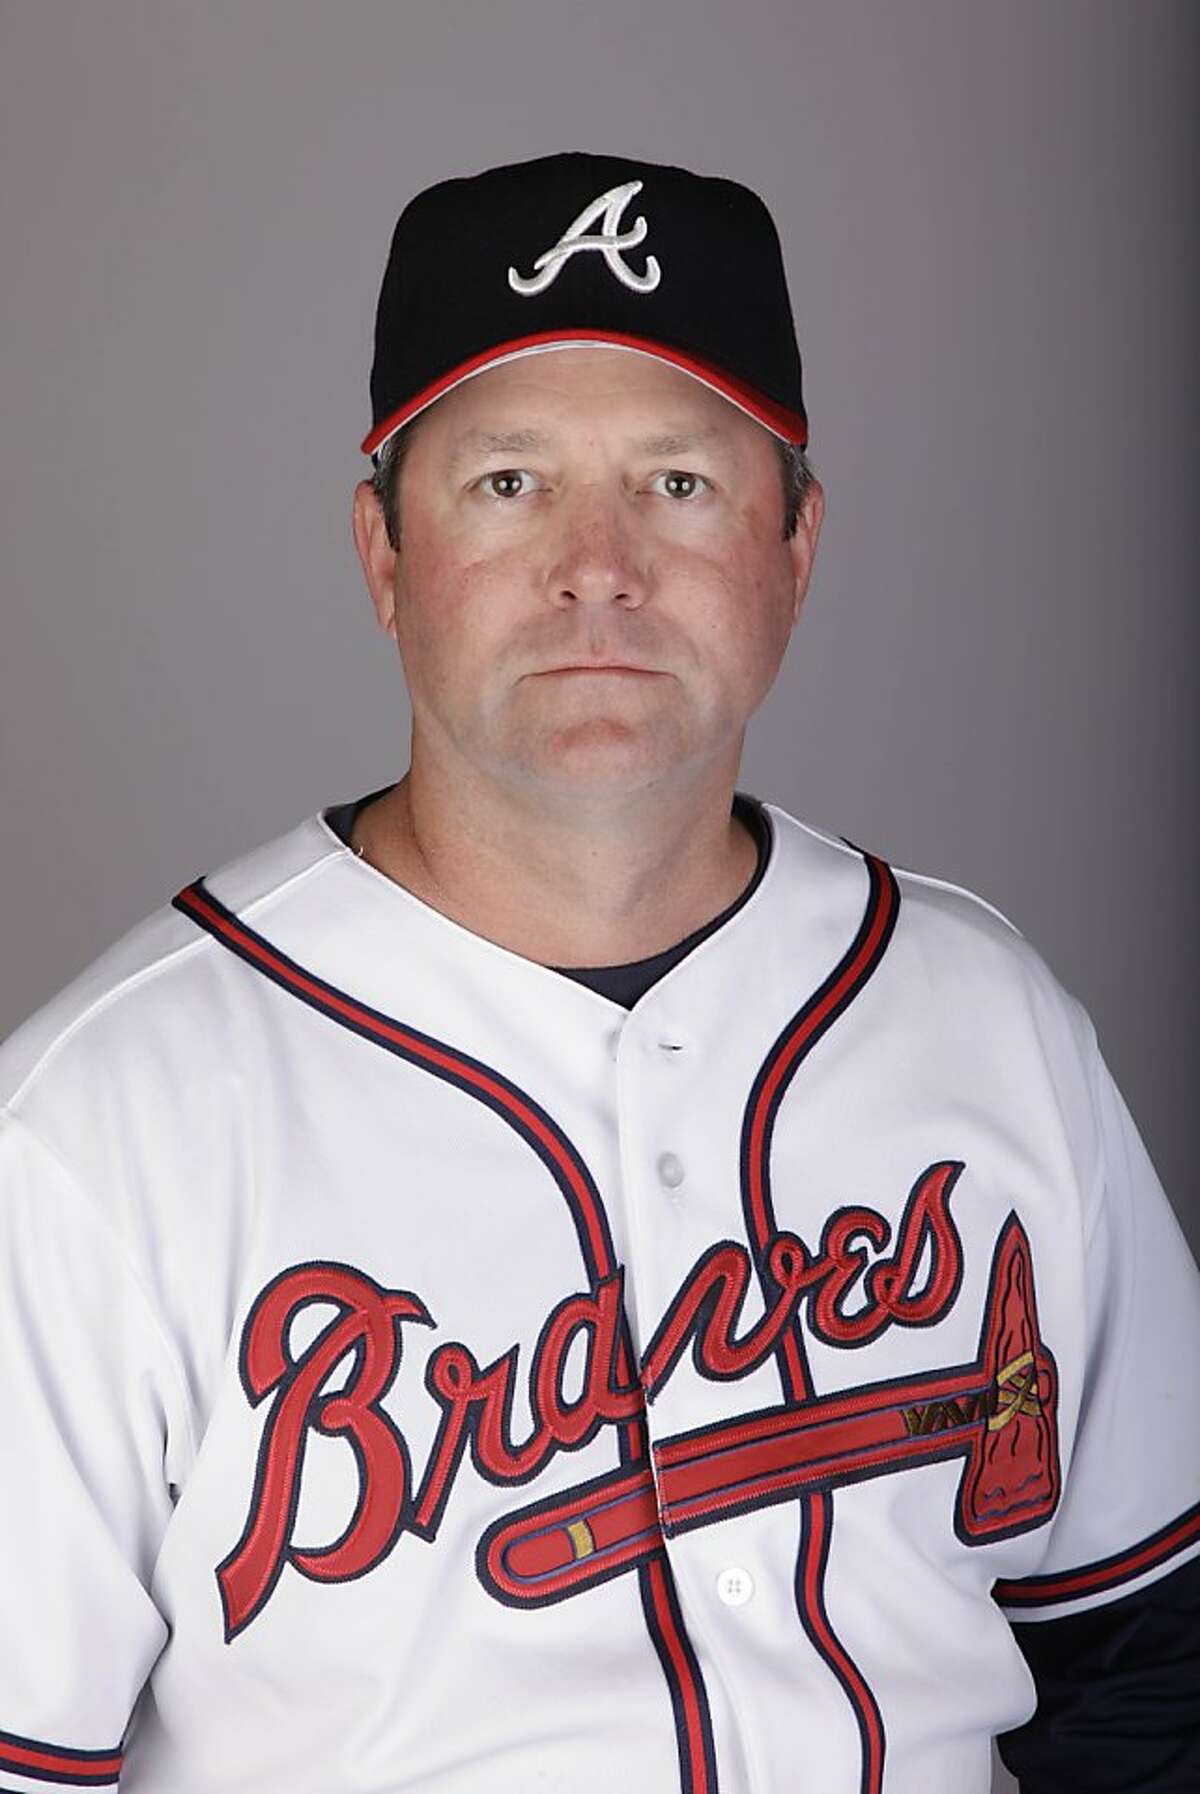 FILE - In this Feb. 21, 2011, file photo, Atlanta Braves pitching coach Roger McDowell poses in a baseball uniform. A California man claims McDowell made homophobic comments and crude sexual gestures toward fans and threatened him with a bat before the Braves played the San Francisco Giants on April 23. Thirty-three-year-old Justin Quinn, of Fresno, made the allegations Wednesday, April 27, 2011, during a news conference organized by prominent Los Angeles attorney Gloria Allred. AP Photo/David J. Phillip, File)